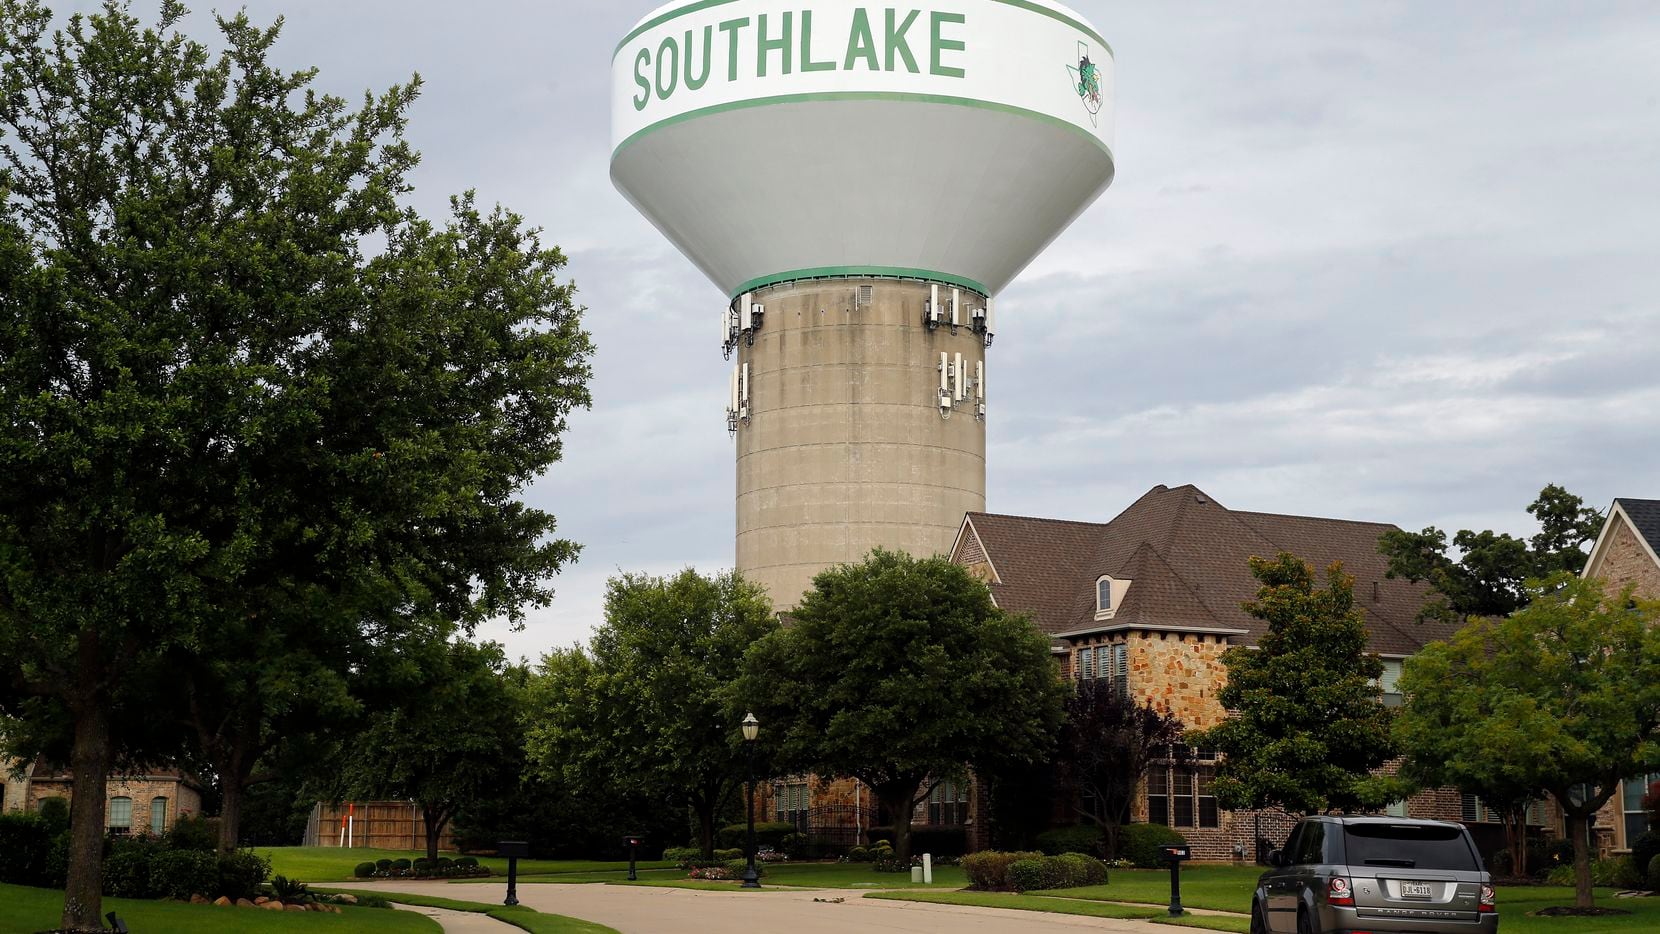 A Southlake water tower is pictured in a Southlake, Texas neighborhood Tuesday, June 23, 2020. (Tom Fox/The Dallas Morning News)